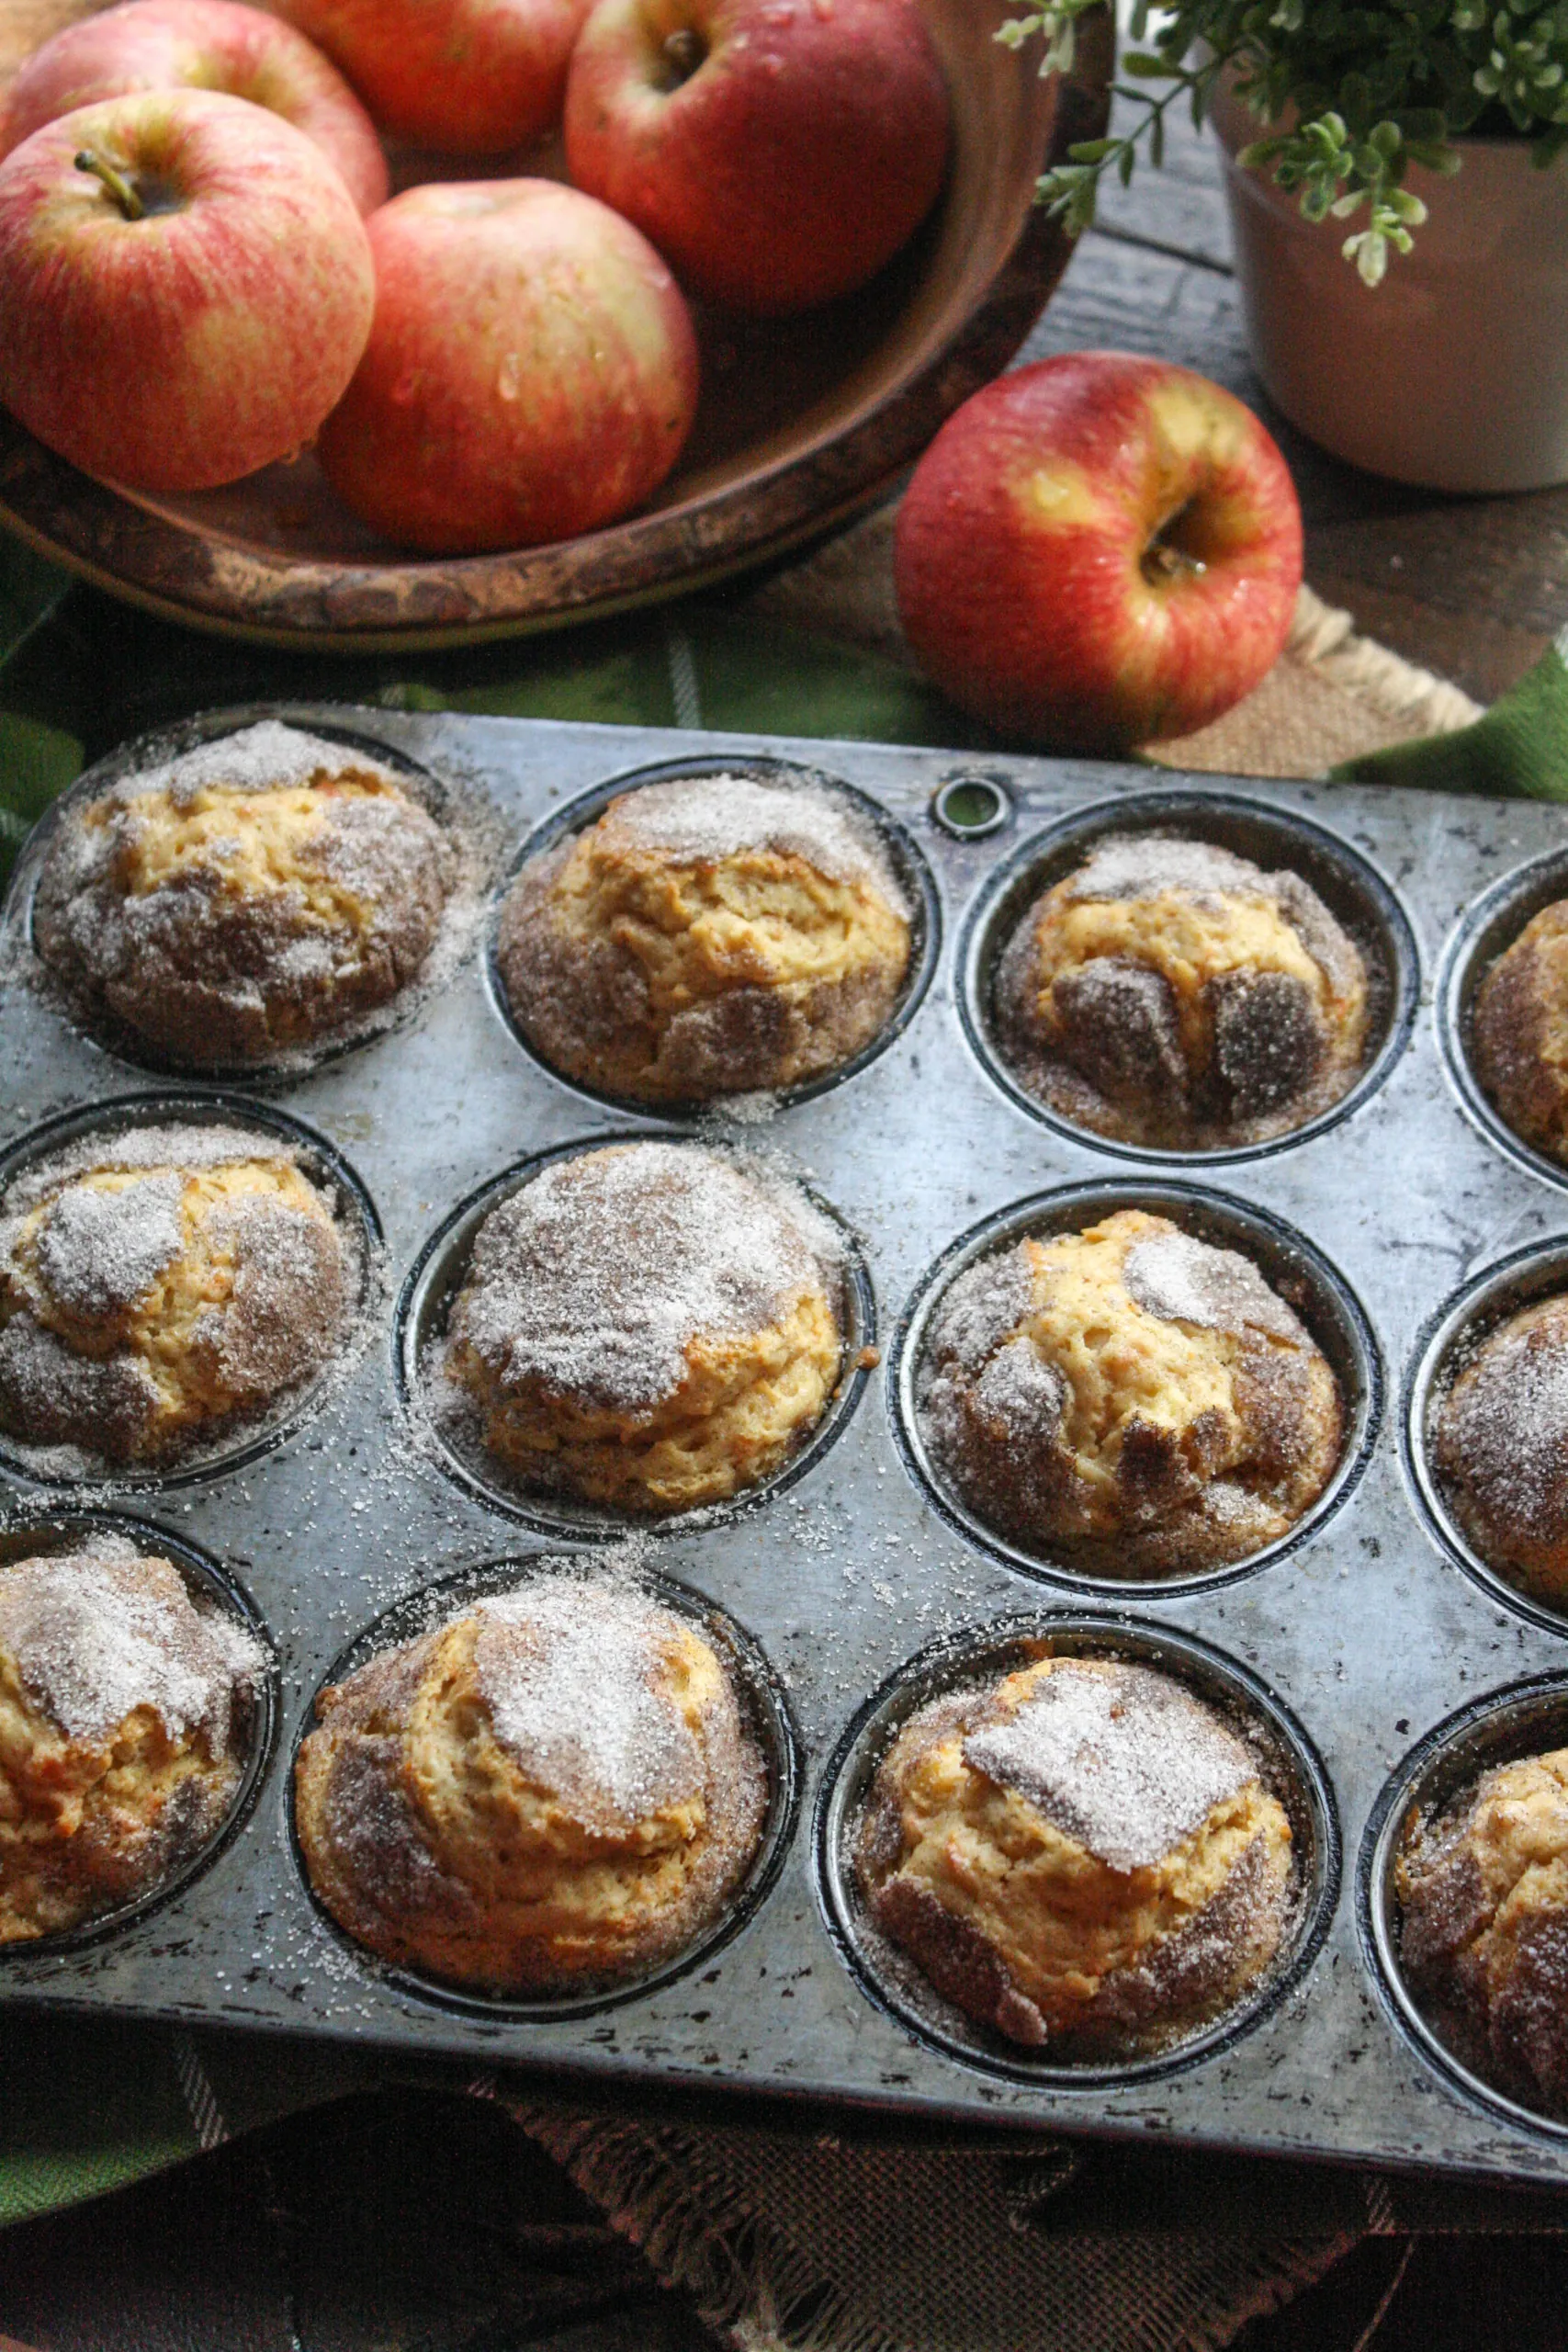 Cinnamon-Sugar Apple & Sweet Potato Muffins are a lovely treat or snack for the season!